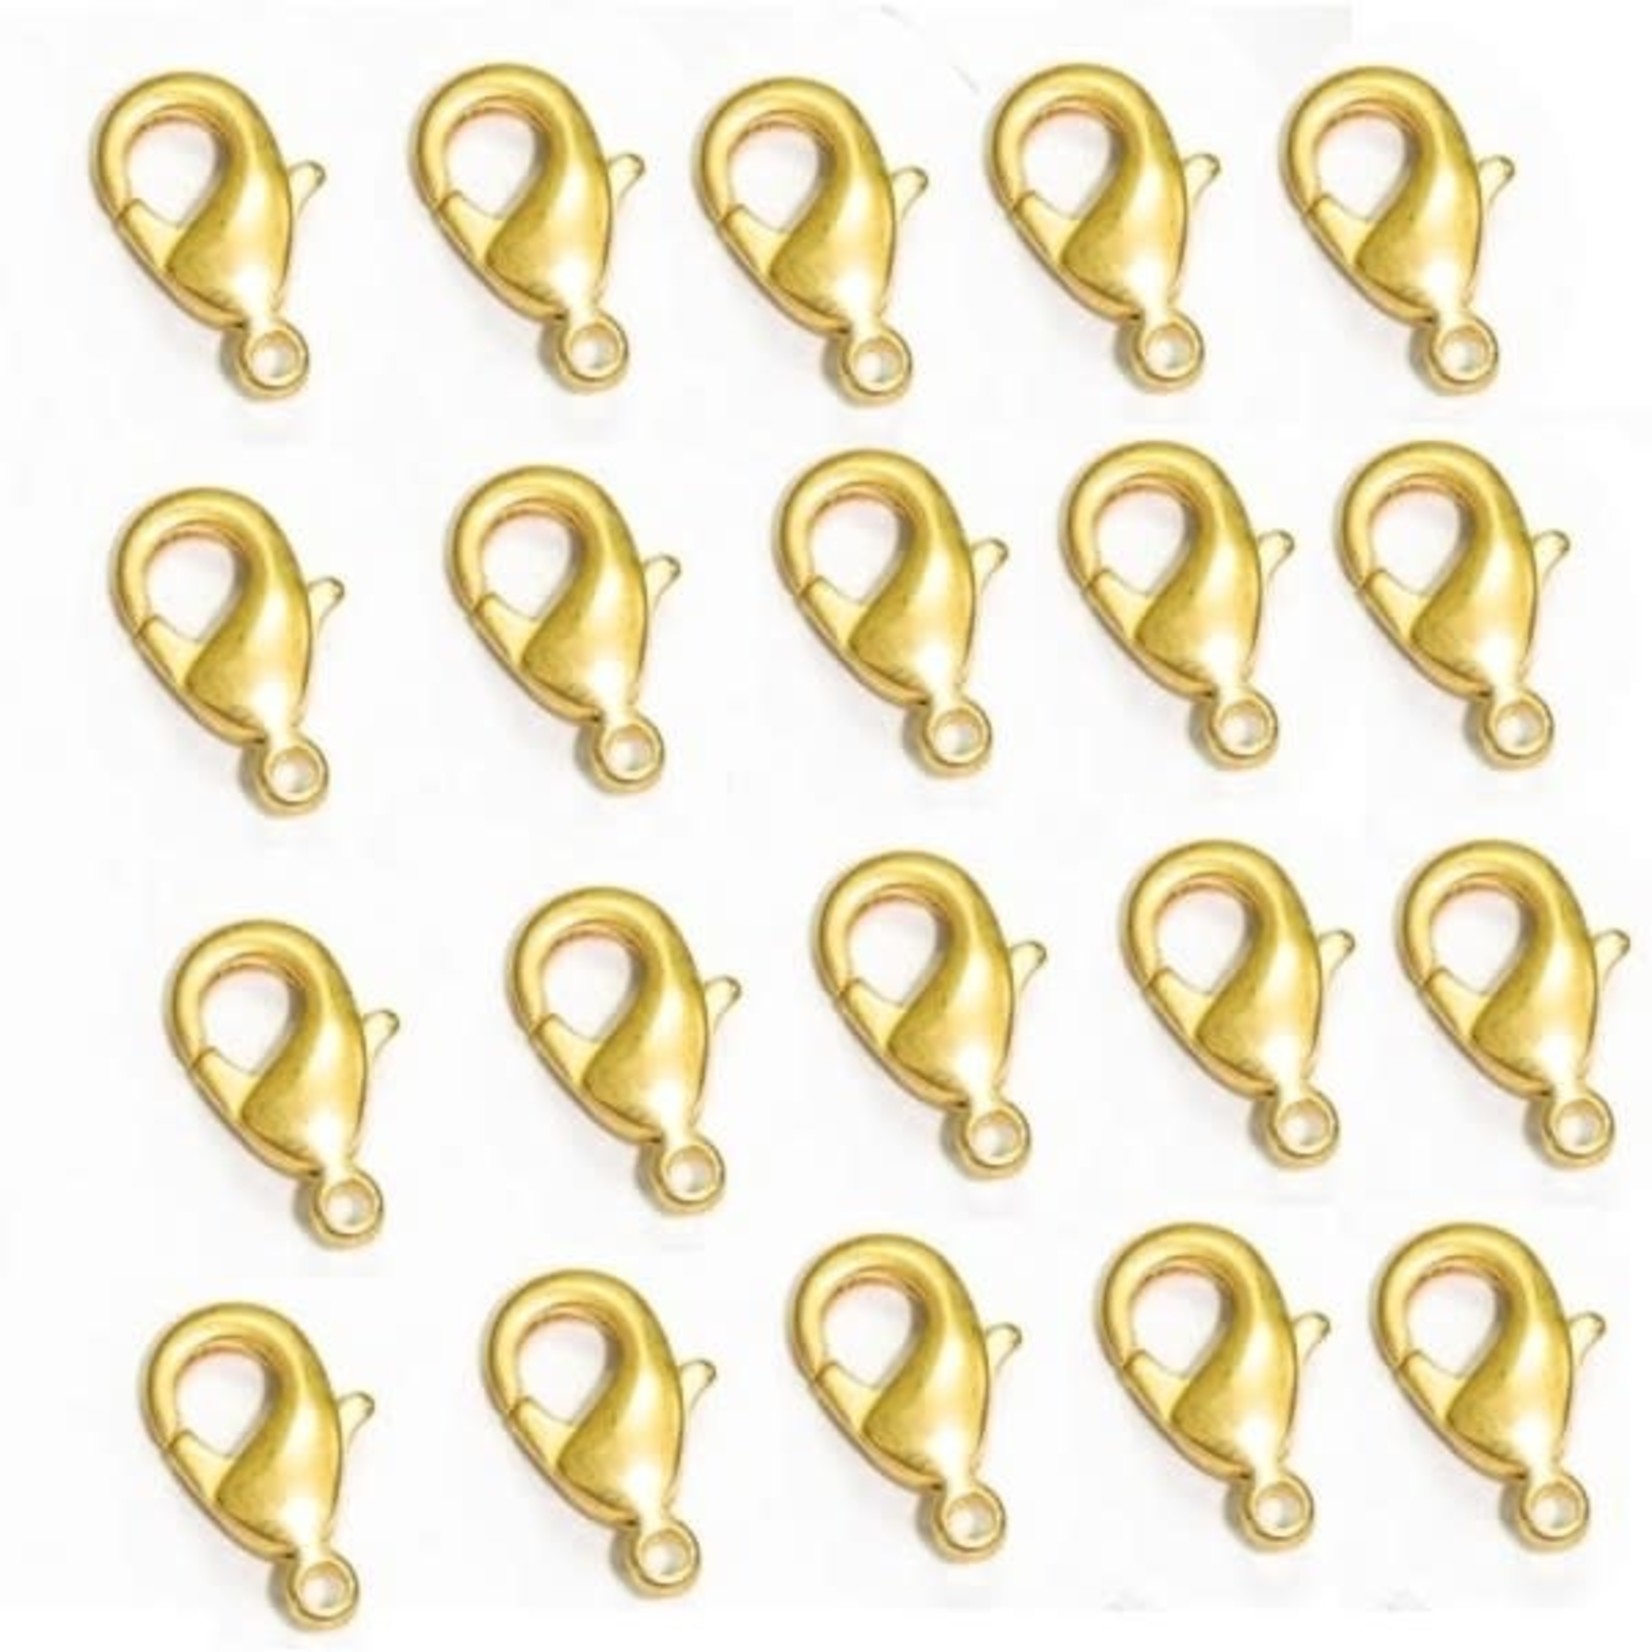 Satin Gold Plated Lobster Clasp 12x7mm Nickel-Free - 20 pieces